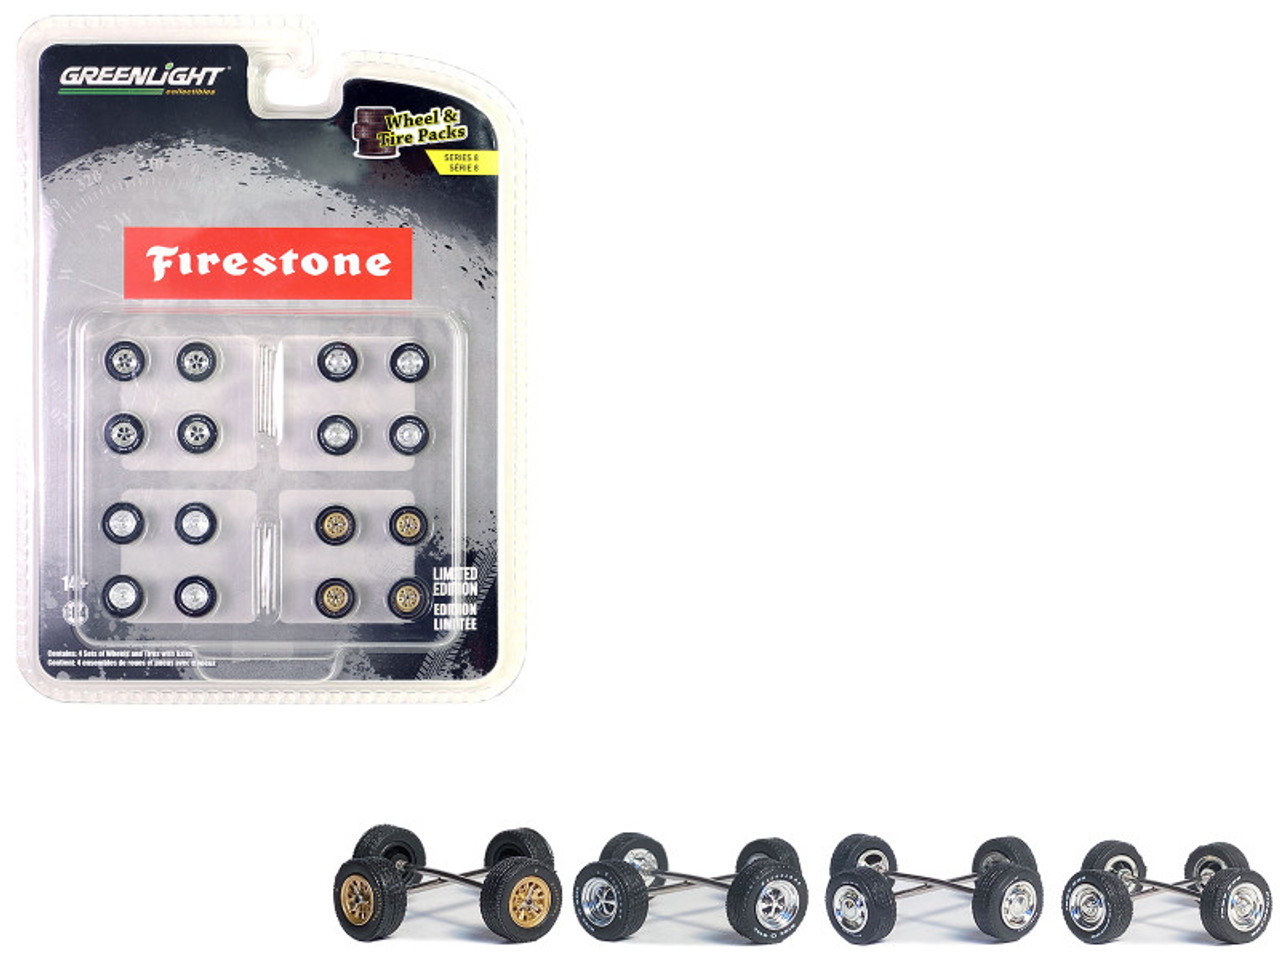 "Firestone" Wheels and Tires Multipack Set of 24 pieces "Wheel & Tire Packs" Series 8 1/64 by Greenlight